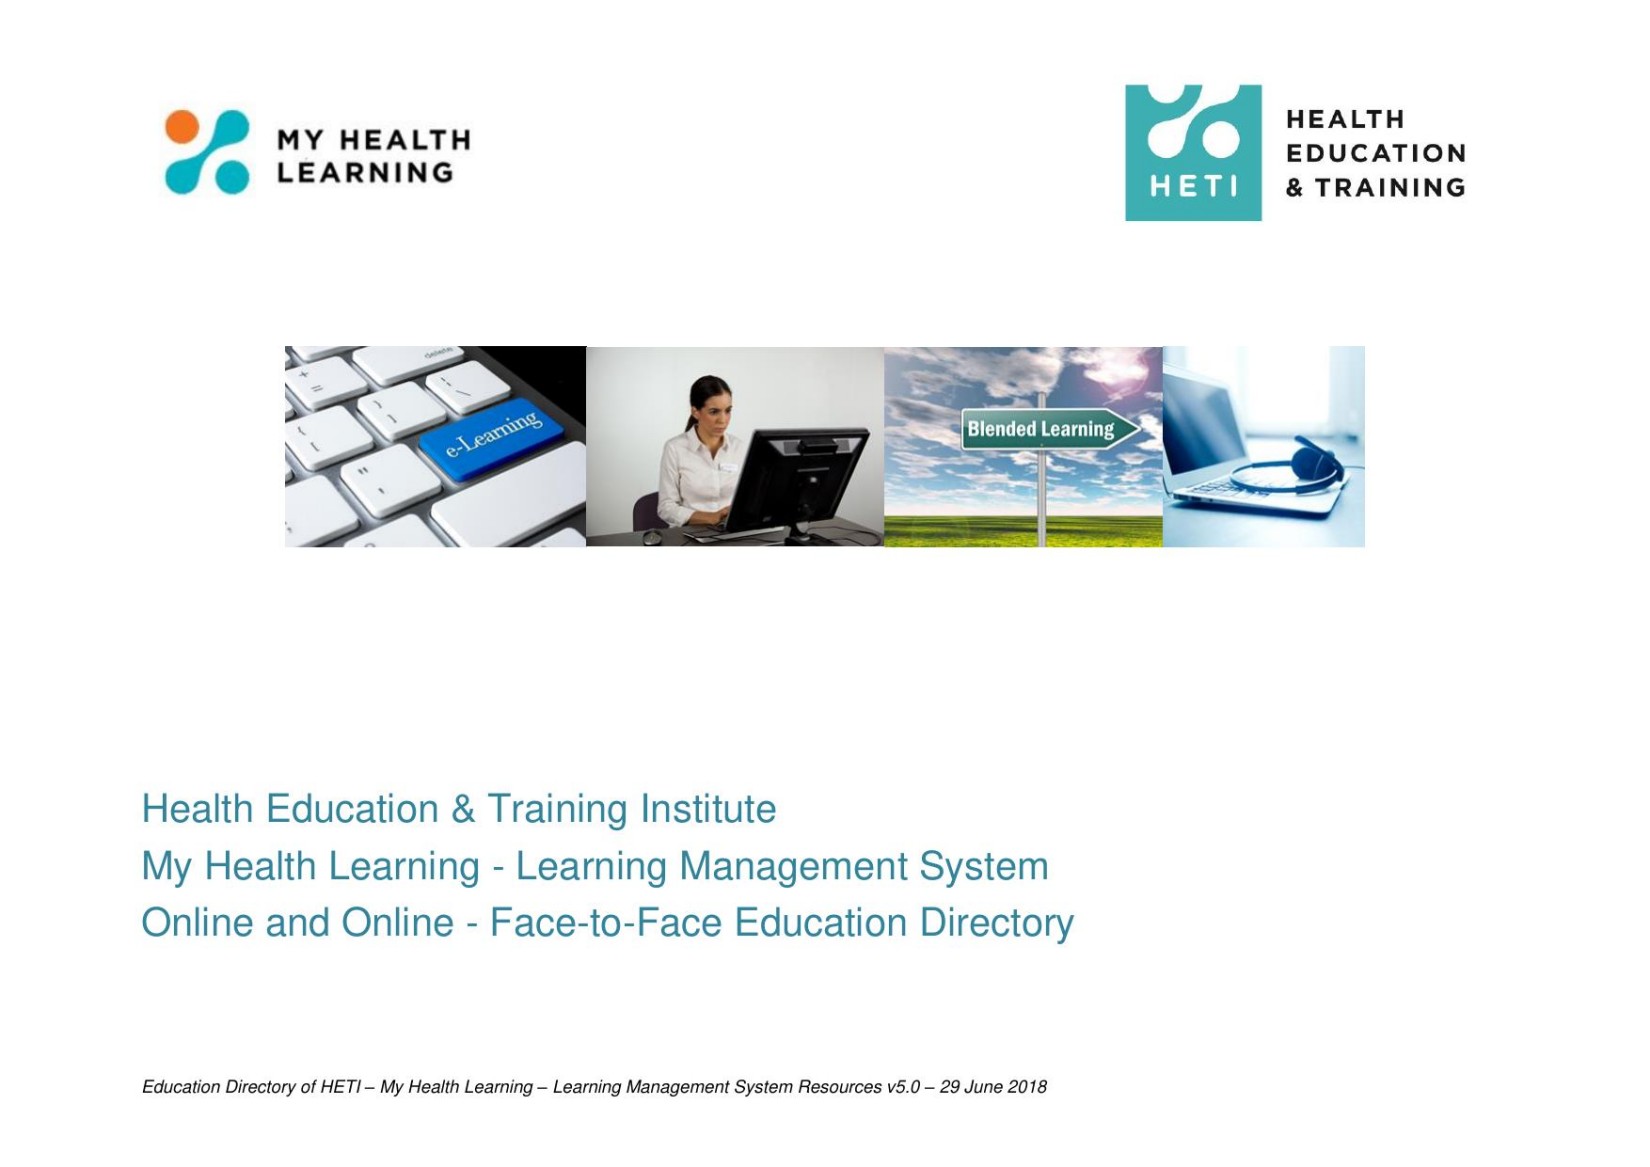 Health Education & Training Institute My Health Learning 2017